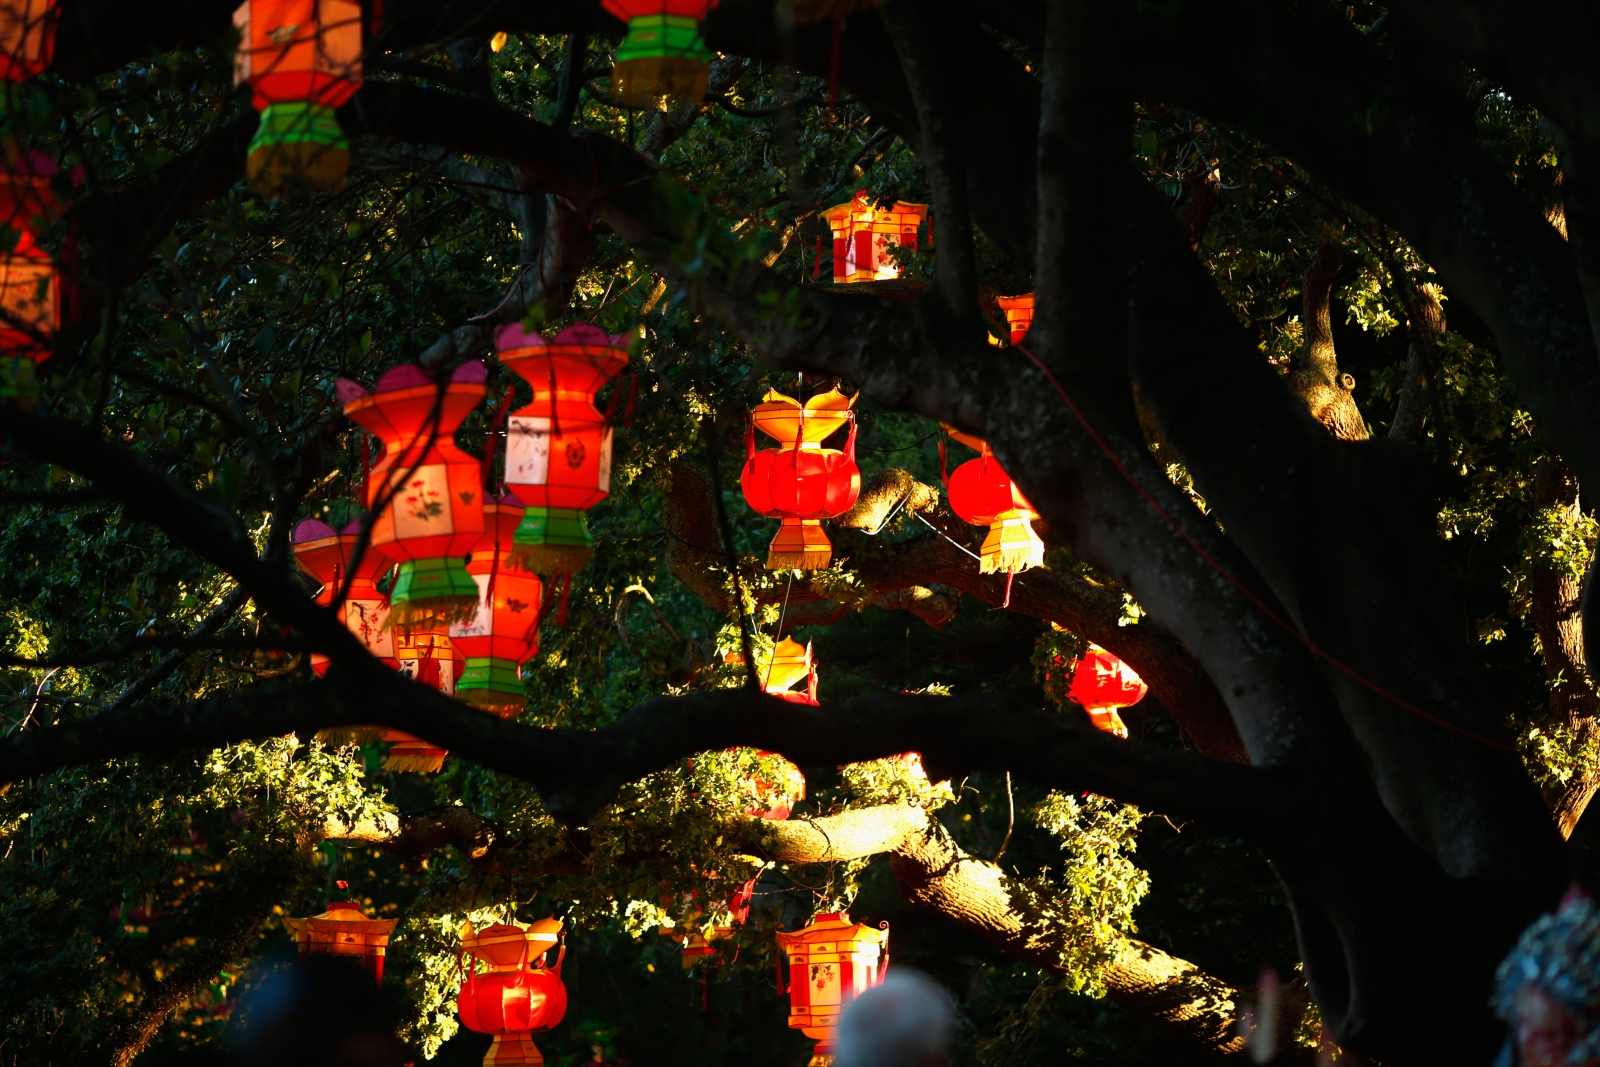 Lantern Festival: History and origins of the 2,200-year-old Chinese celebration